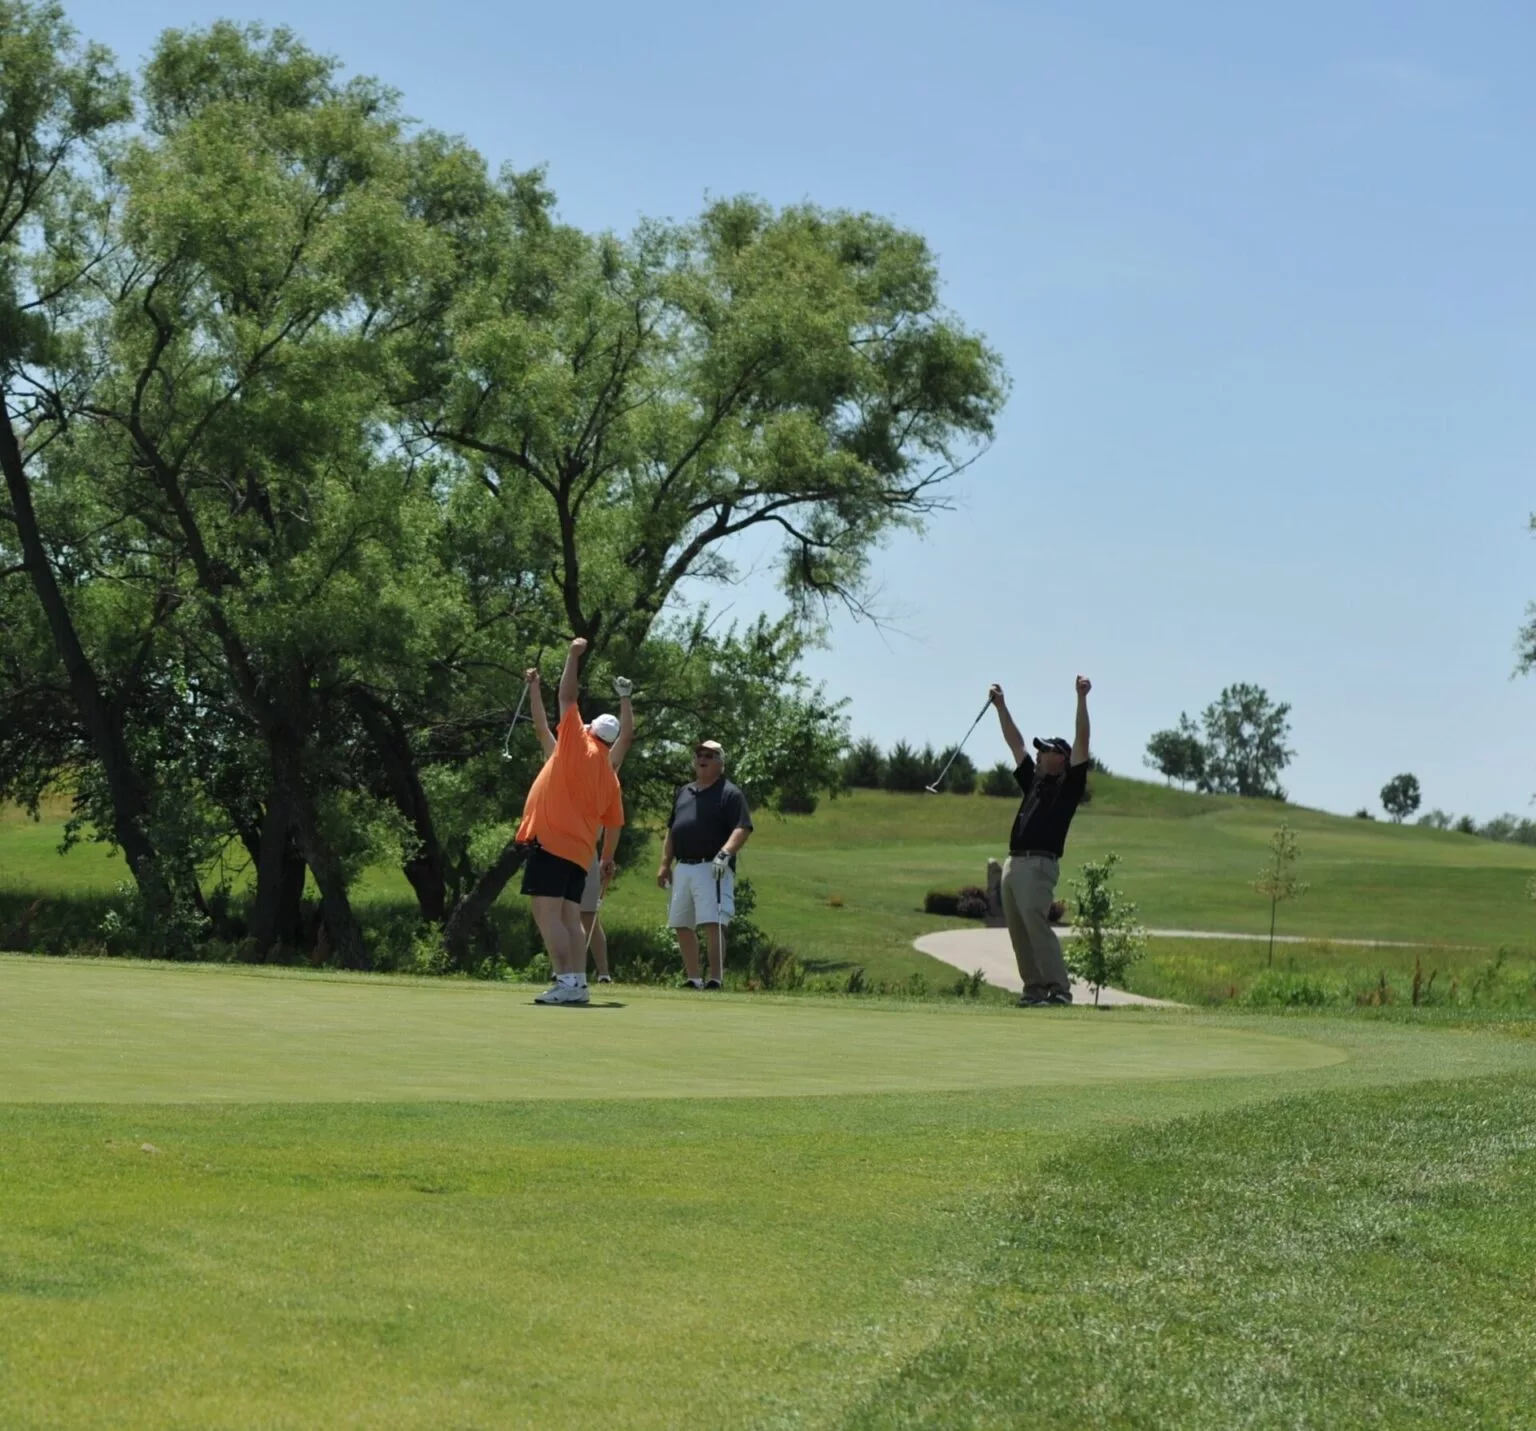 A group of golfers are celebrating on the green with clubs in hand.